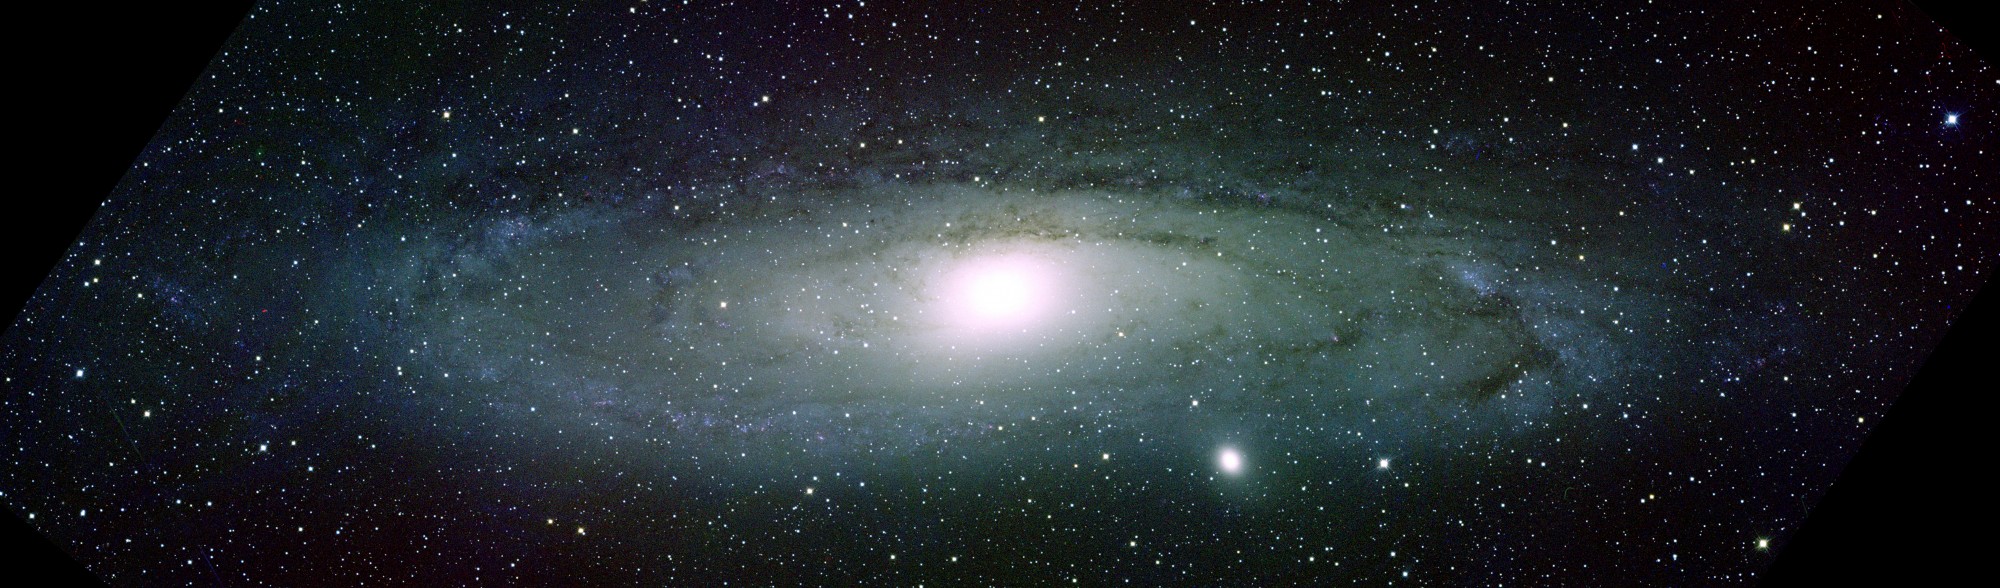 Andromeda Galaxy (M31) 2.5 ly Ssc2005-20a3